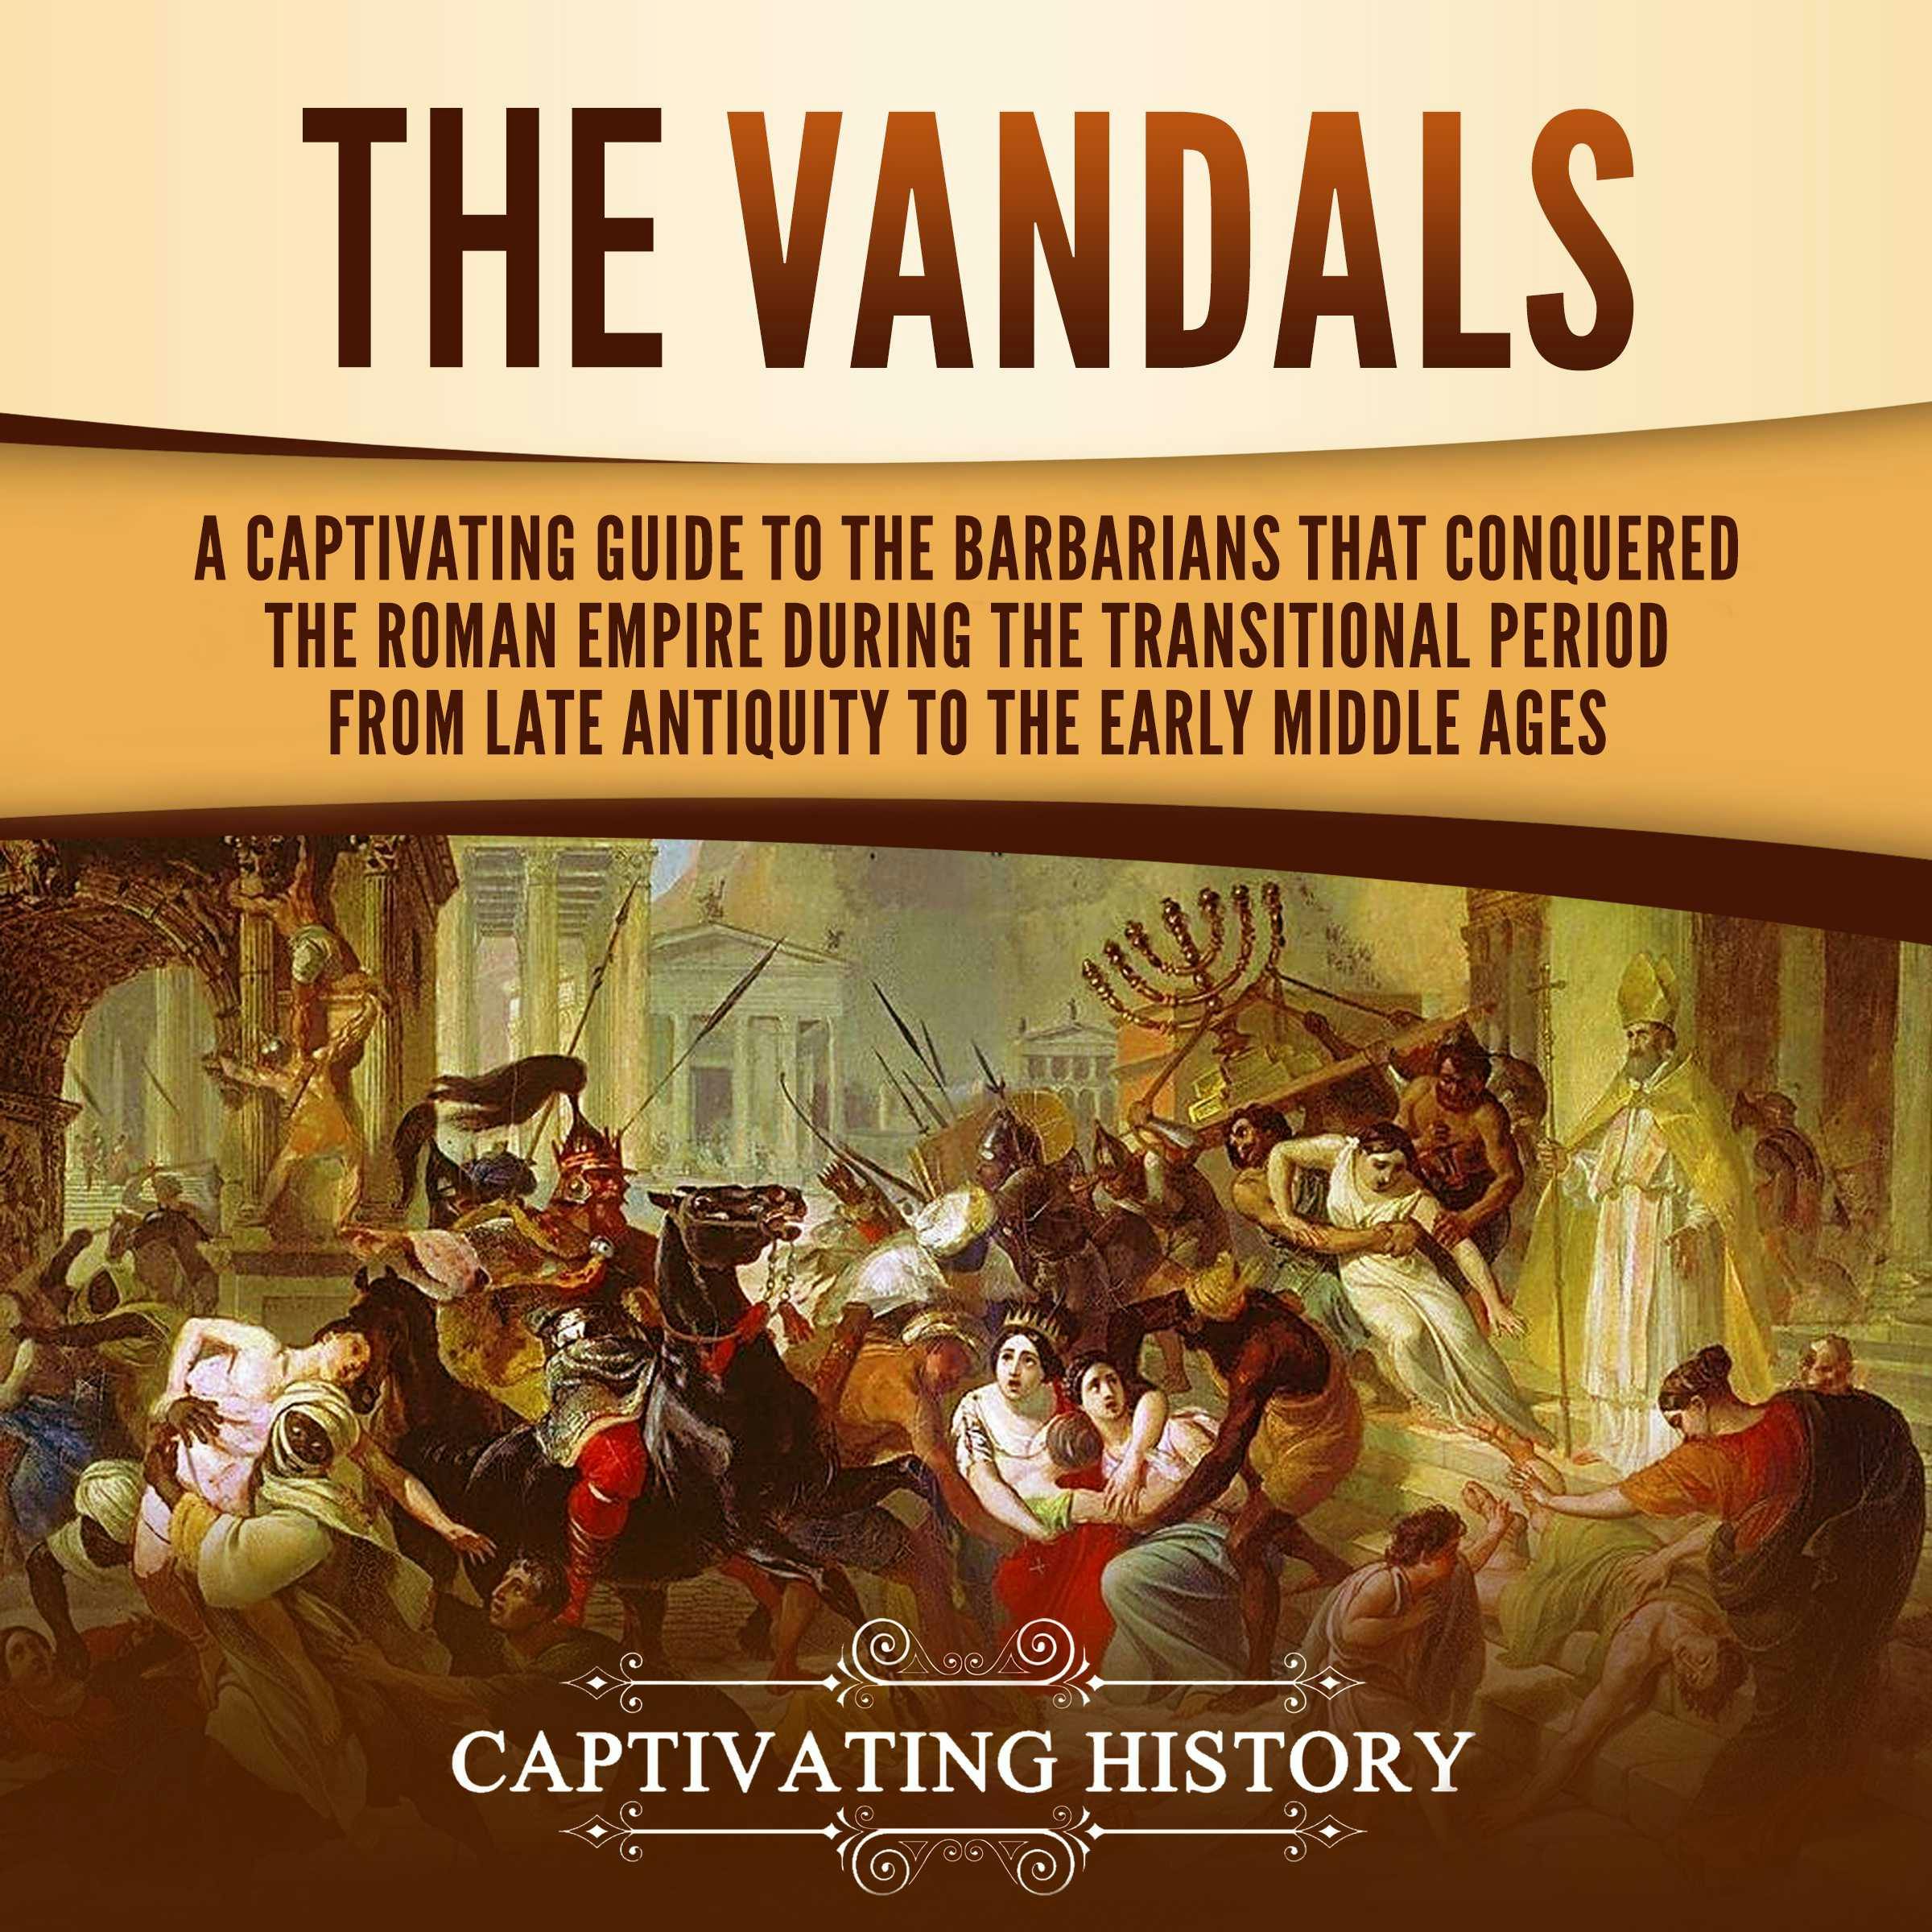 The Vandals: A Captivating Guide to the Barbarians That Conquered the Roman Empire During the Transitional Period from Late Antiquity to the Early Middle Ages - undefined